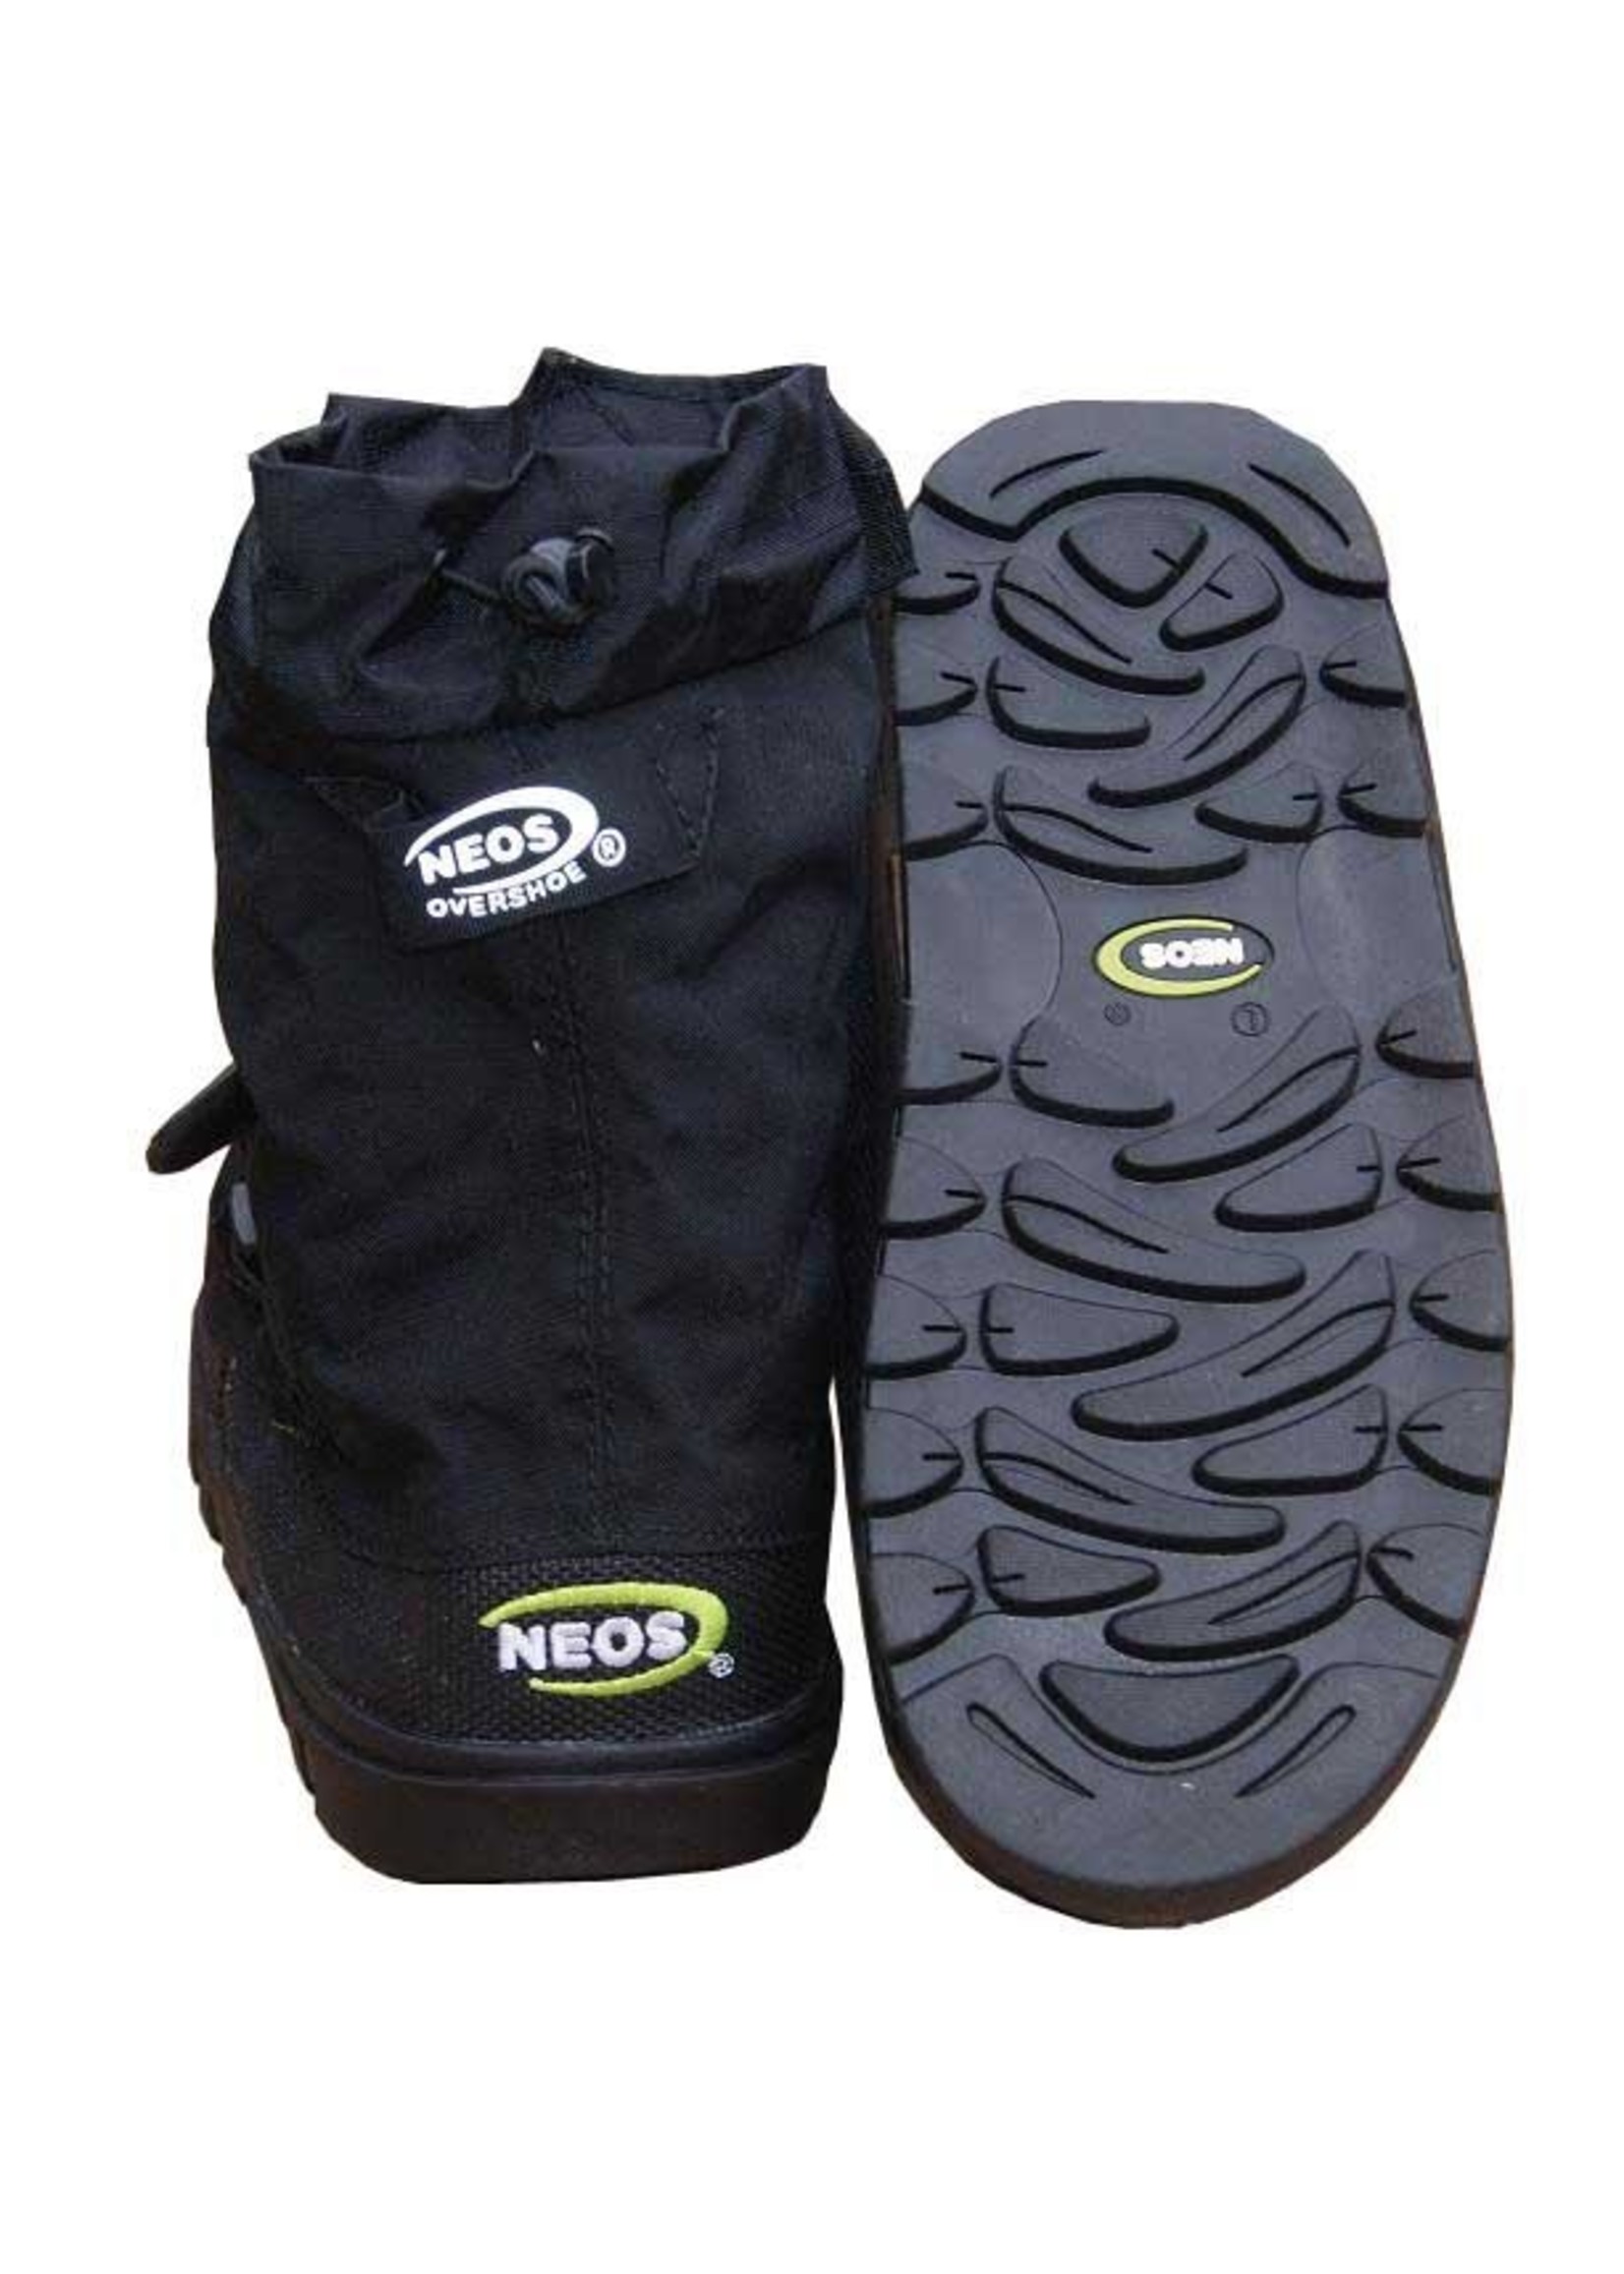 NEOS Men's Voyager Mid Overshoes